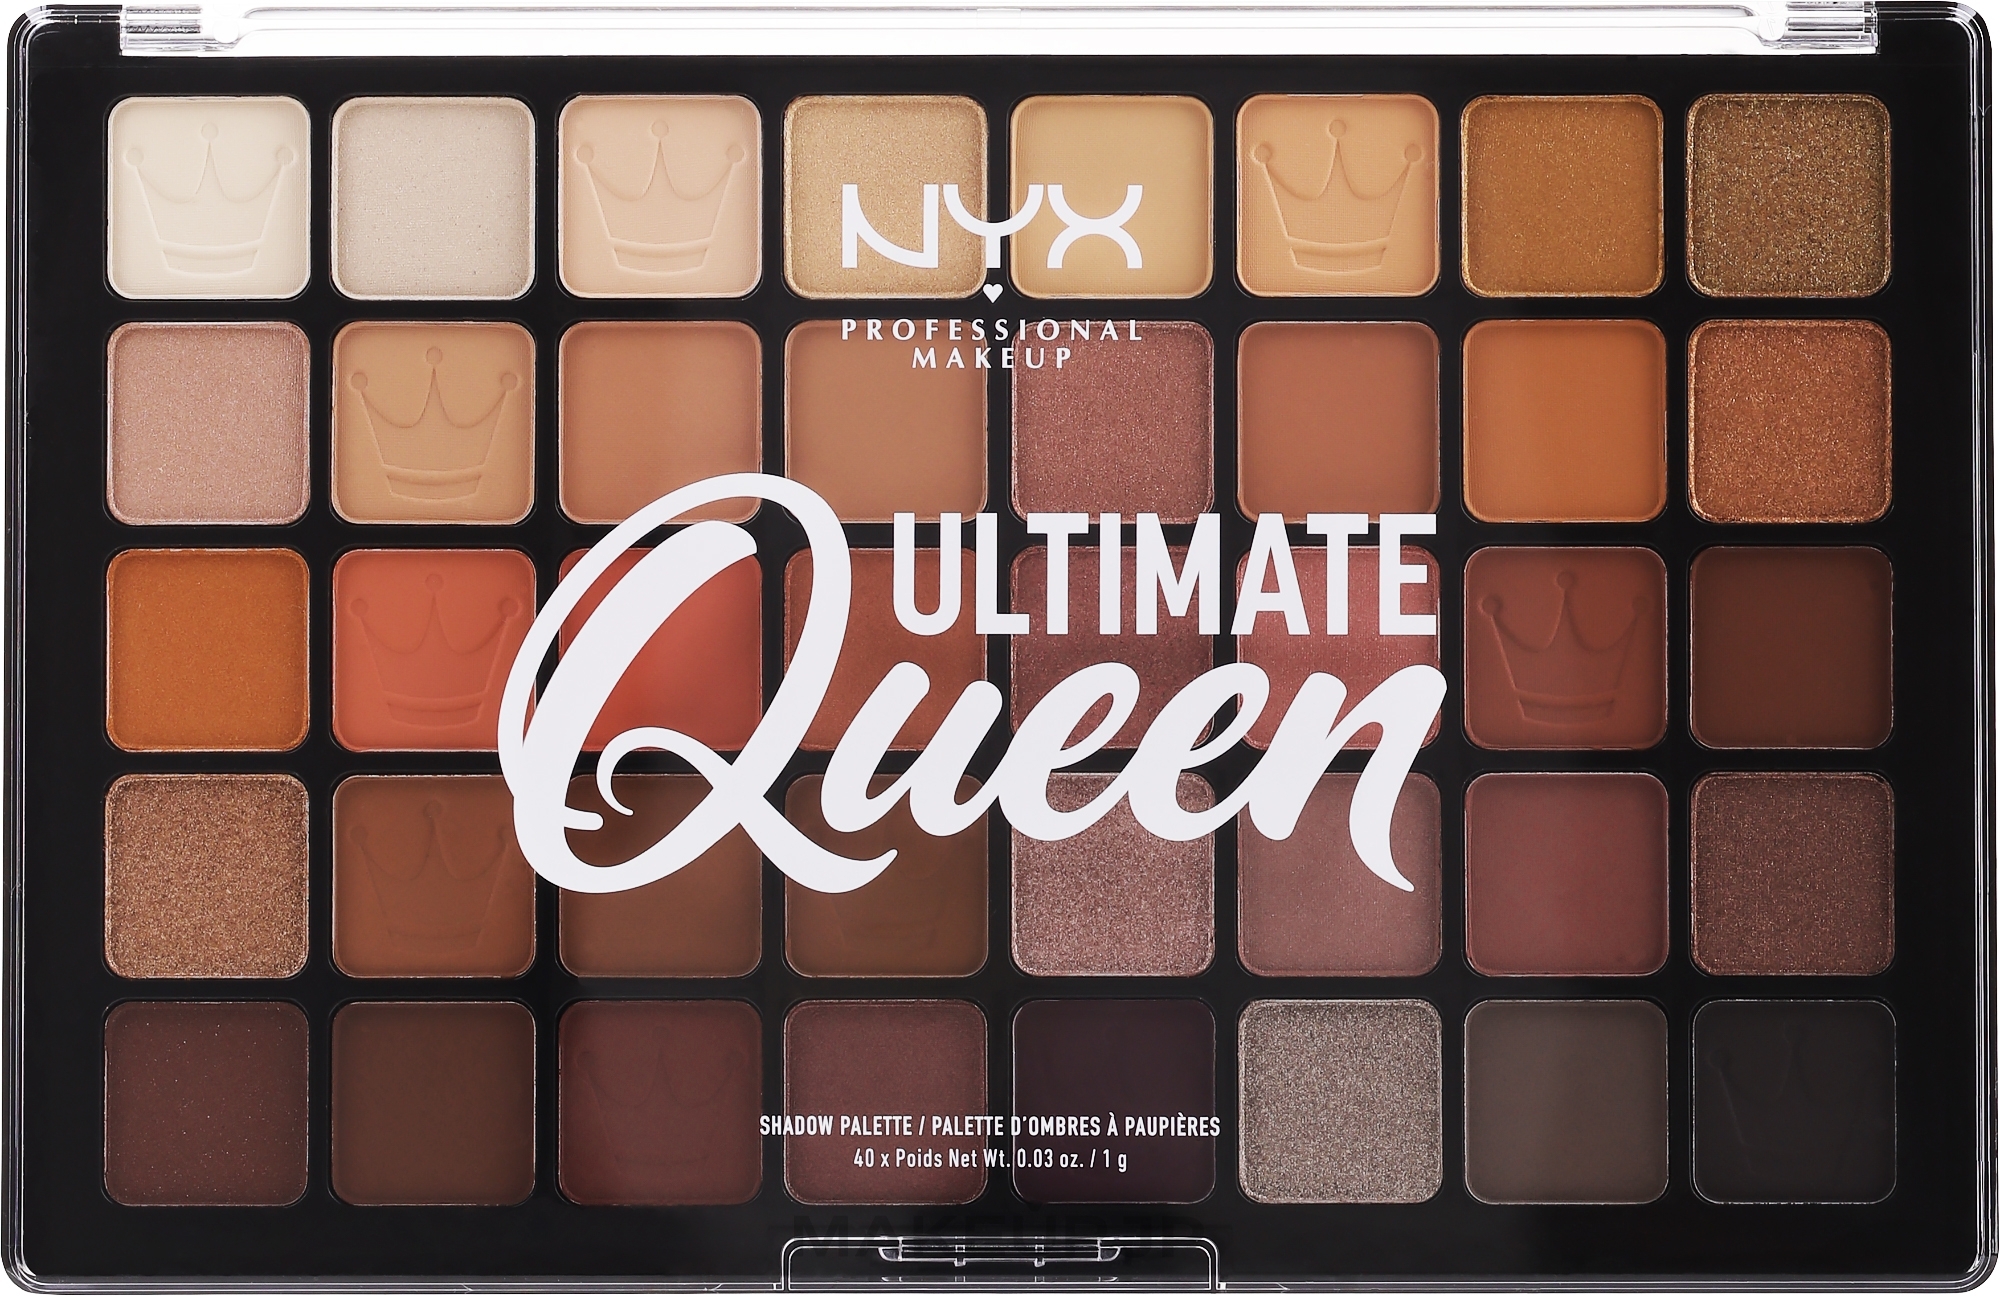 Eyeshadow Palette - NYX Professional Makeup Makeup Ultimate Queen Eyeshadow Palette 40 Pan Limited Edition — photo 40 g